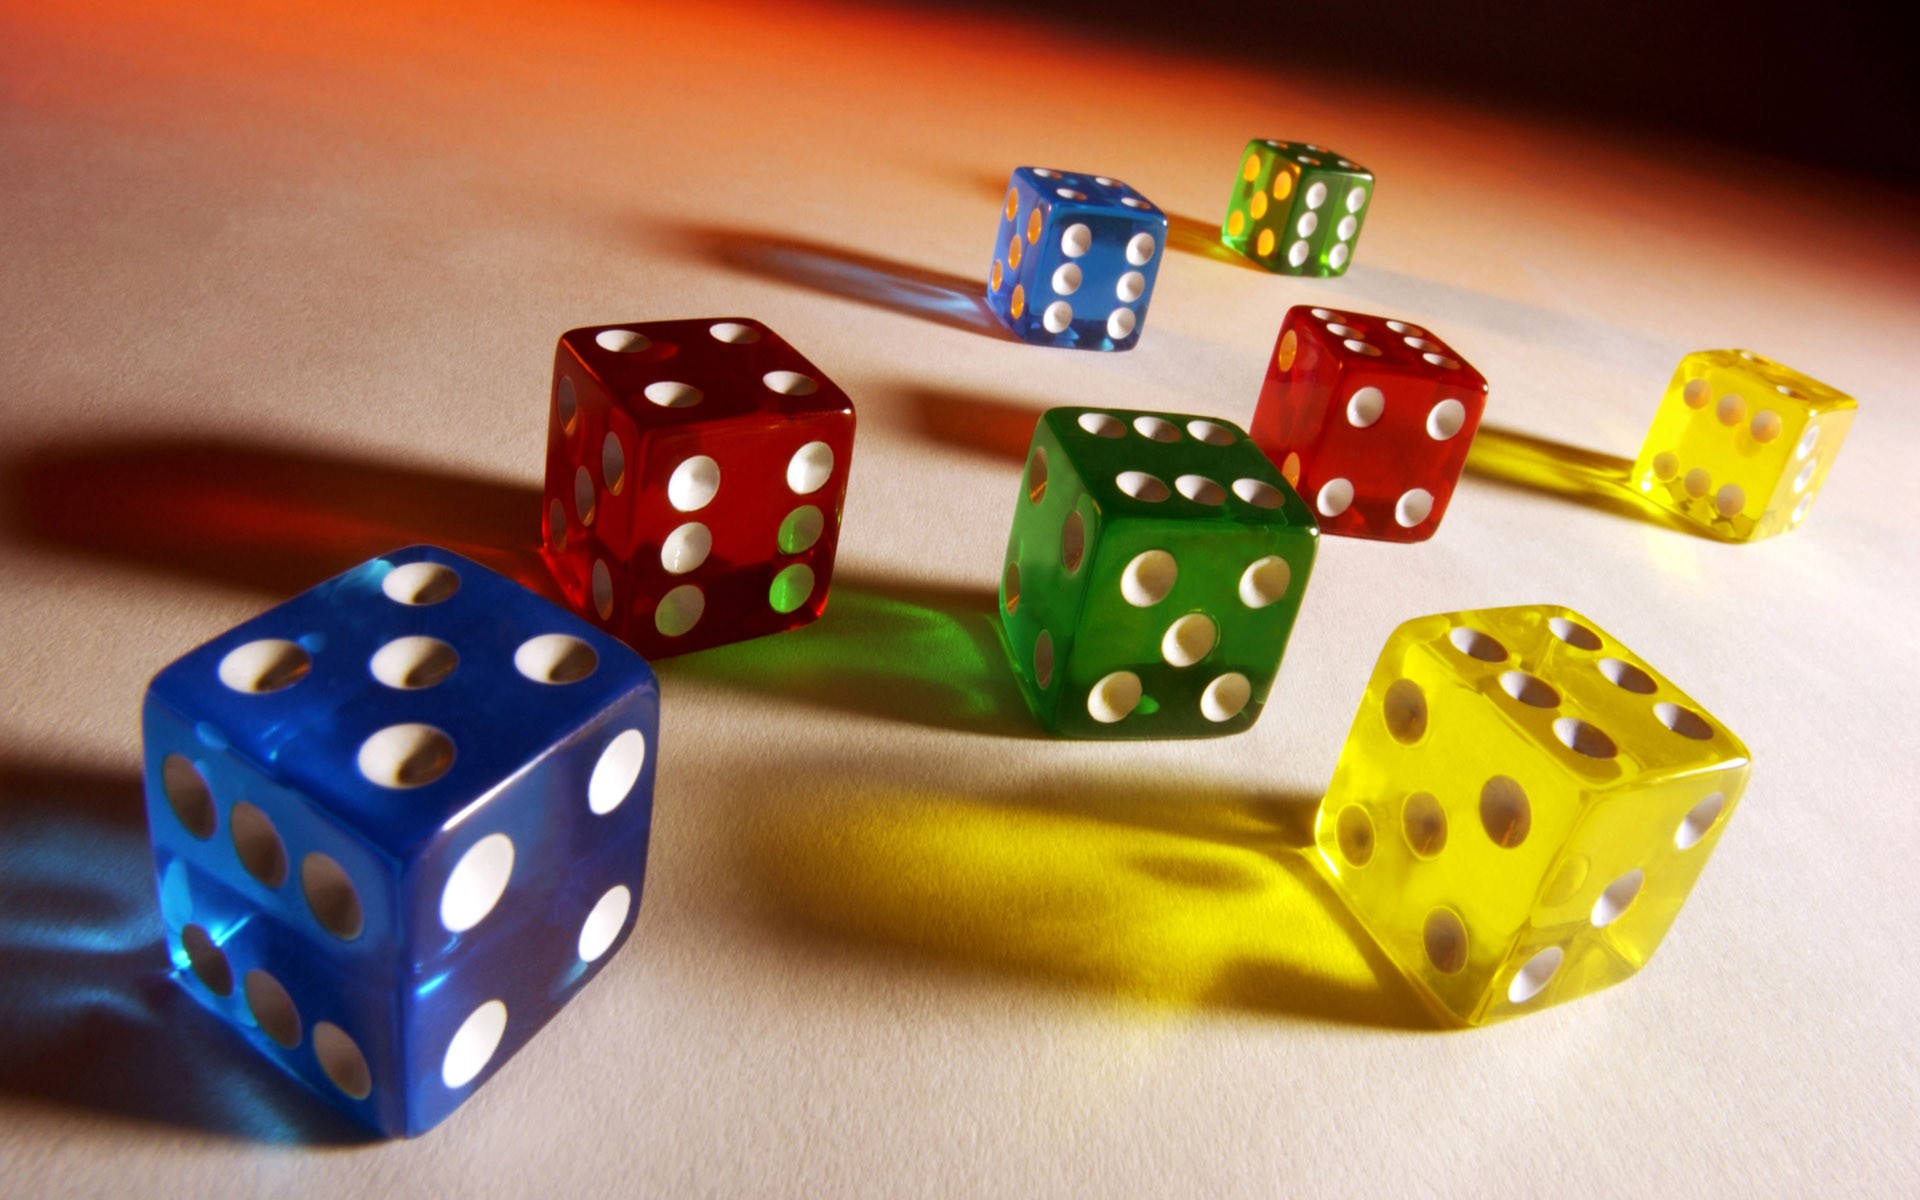 dice wallpaper,dice game,games,indoor games and sports,dice,recreation